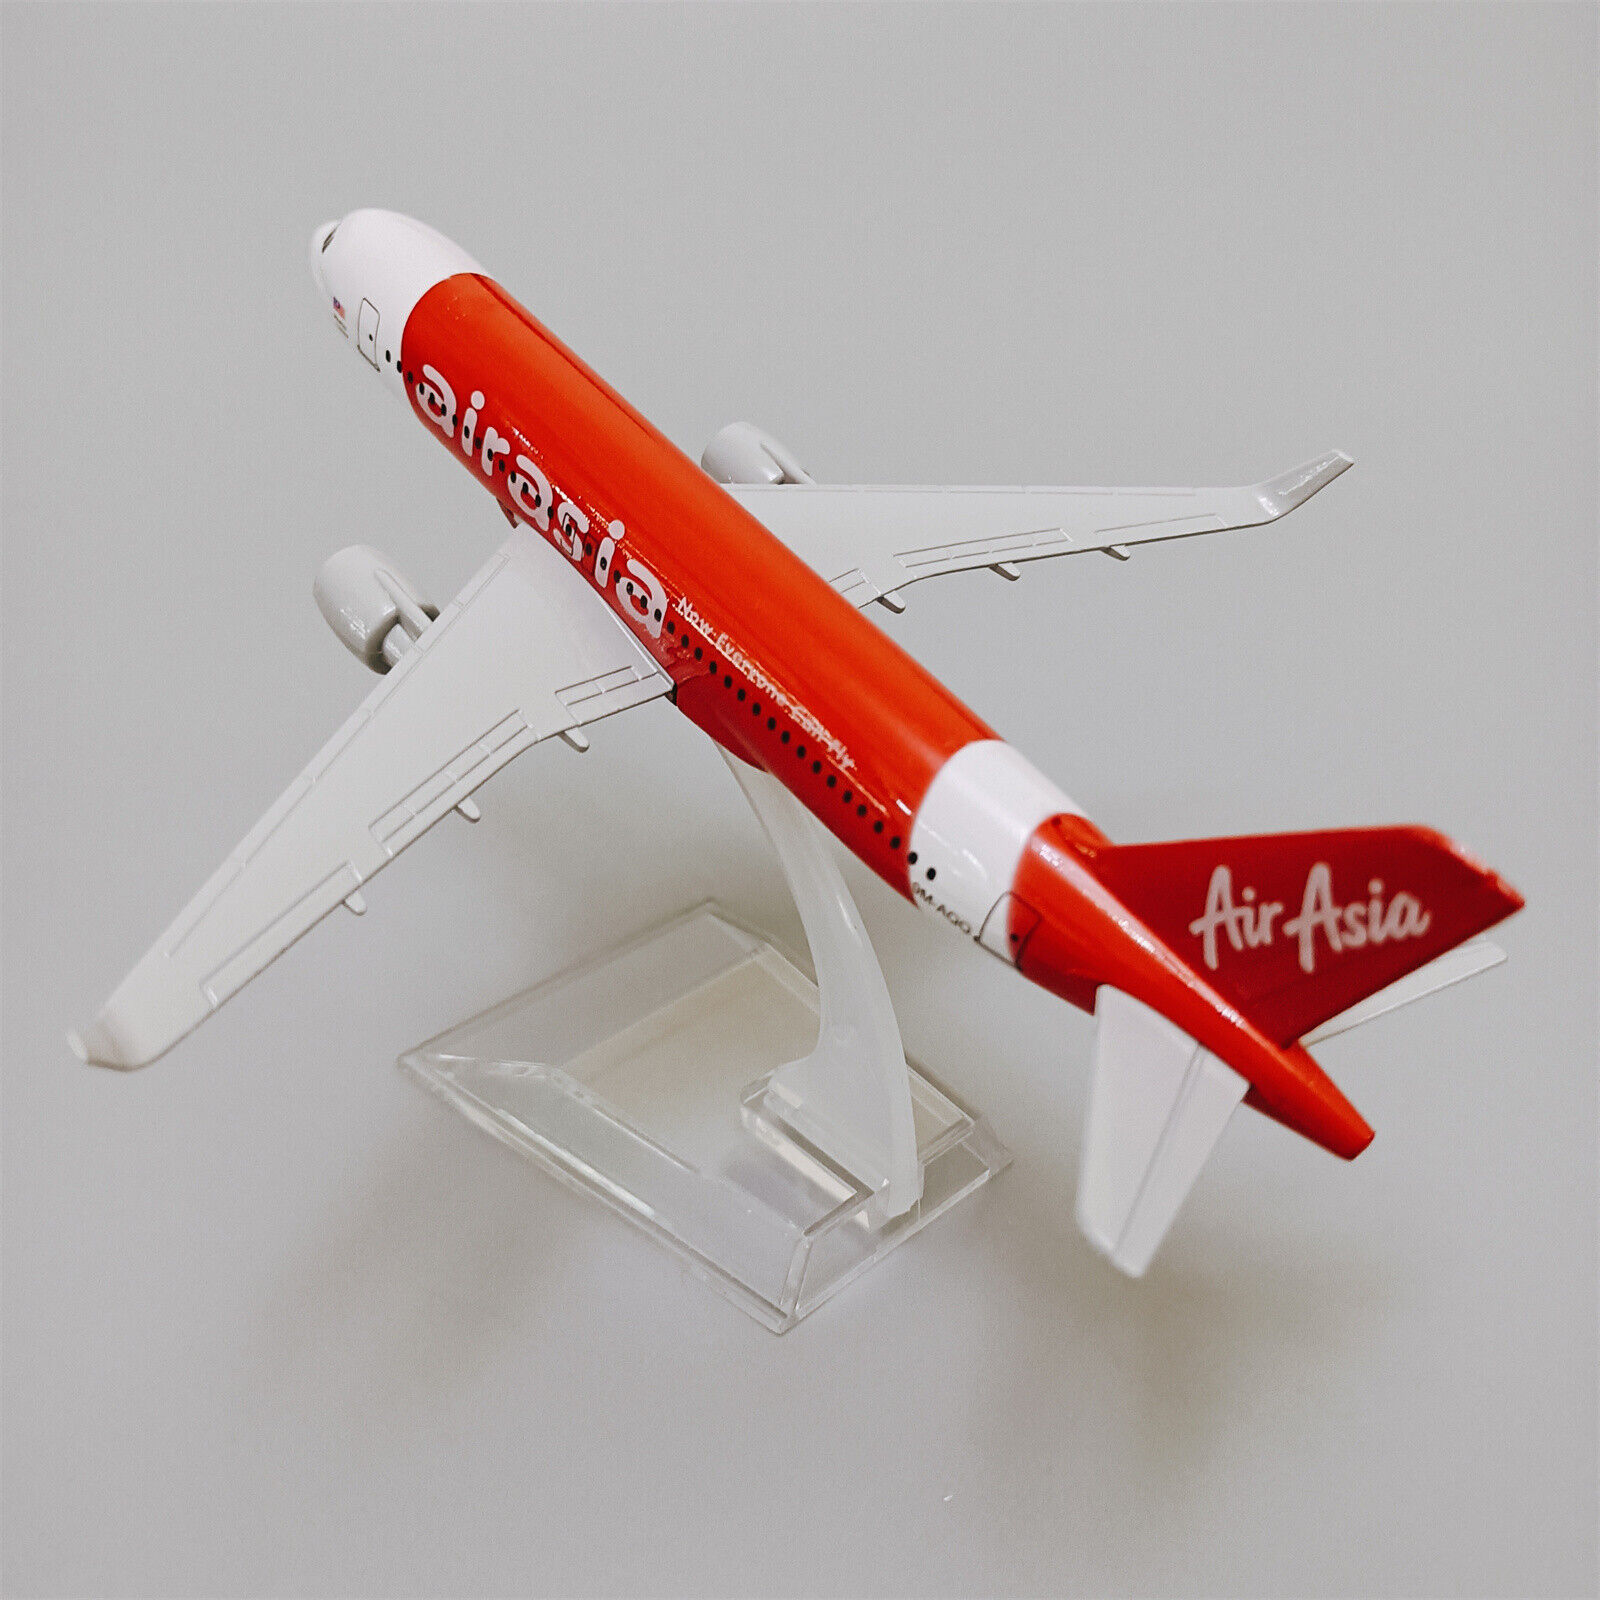 Air Asia Airlines Airbus A320 Airplane Model Plane Metal Aircraft Red 16cm